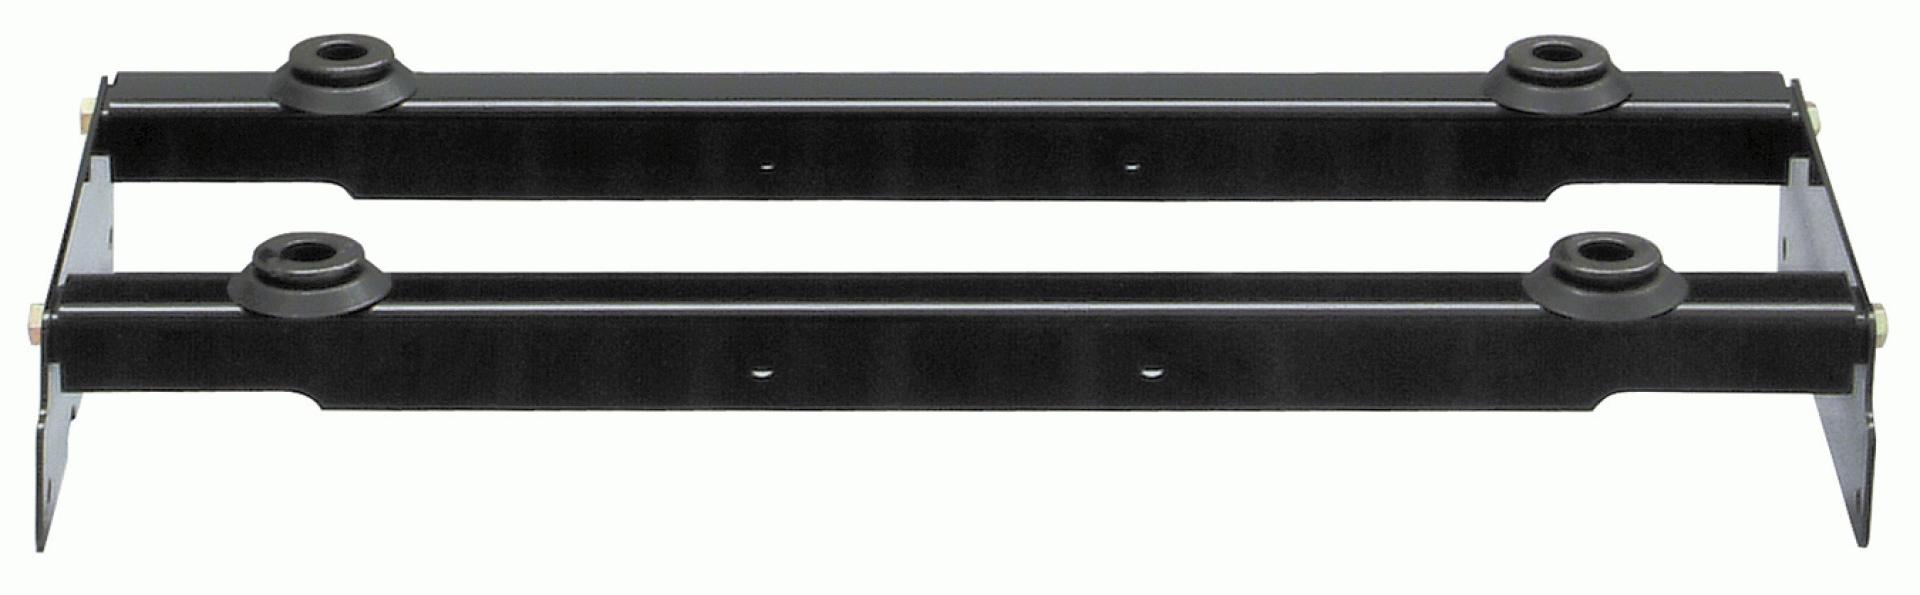 REESE | 30062 | RAIL KIT FOR FIFTH WHEEL ELITE SERIES FITS CHEVROLET/GMC CLASSIC 3500 8' BED